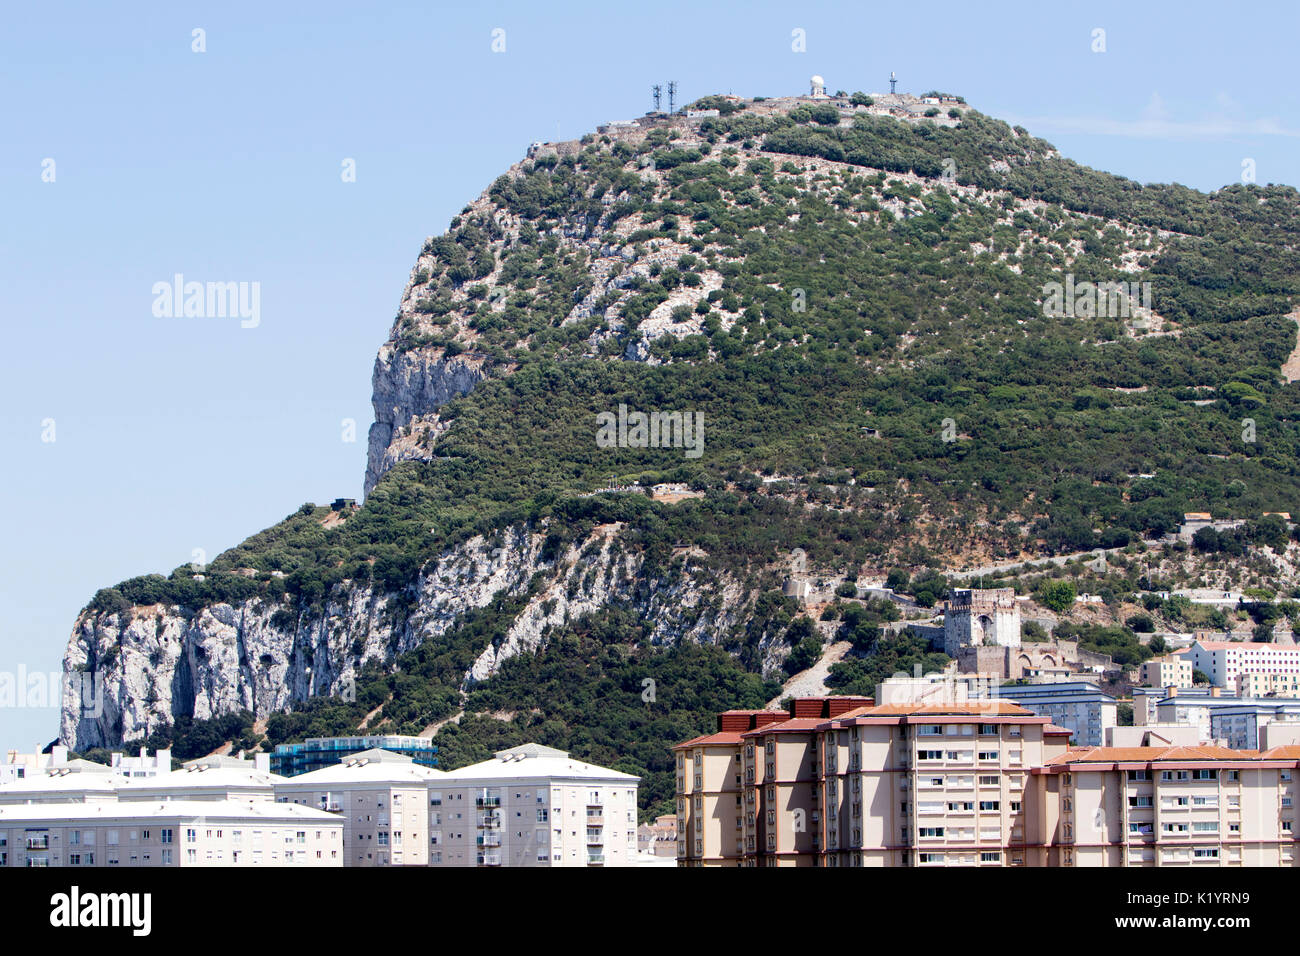 The Rock of Gibraltar monolithic limestone promontory located in British overseas territory of Gibraltar on the Iberian Peninsula Stock Photo